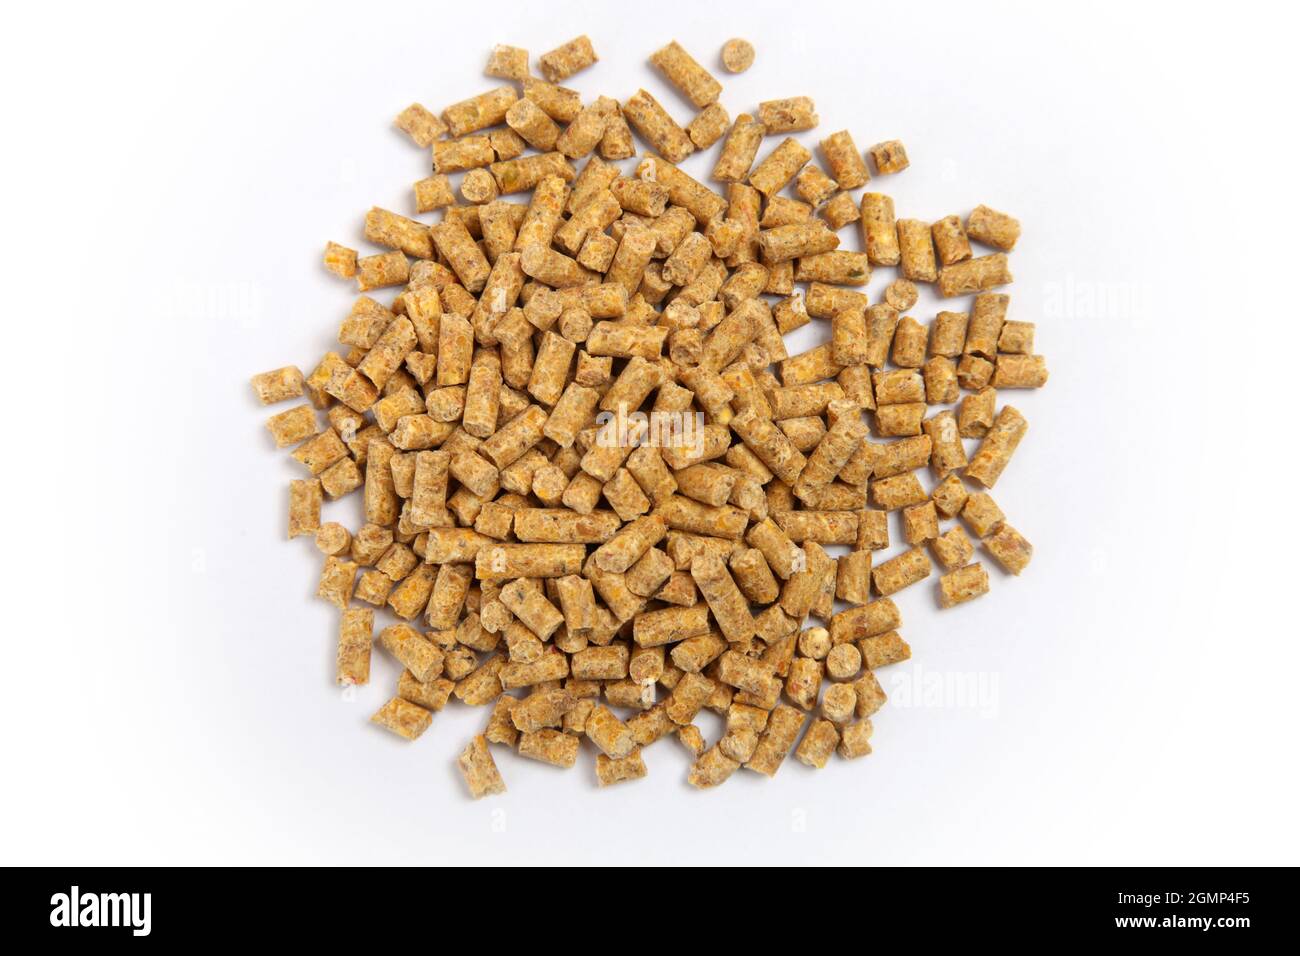 Pile of compound feed pellets isolated on white.   Animal feed. Stock Photo